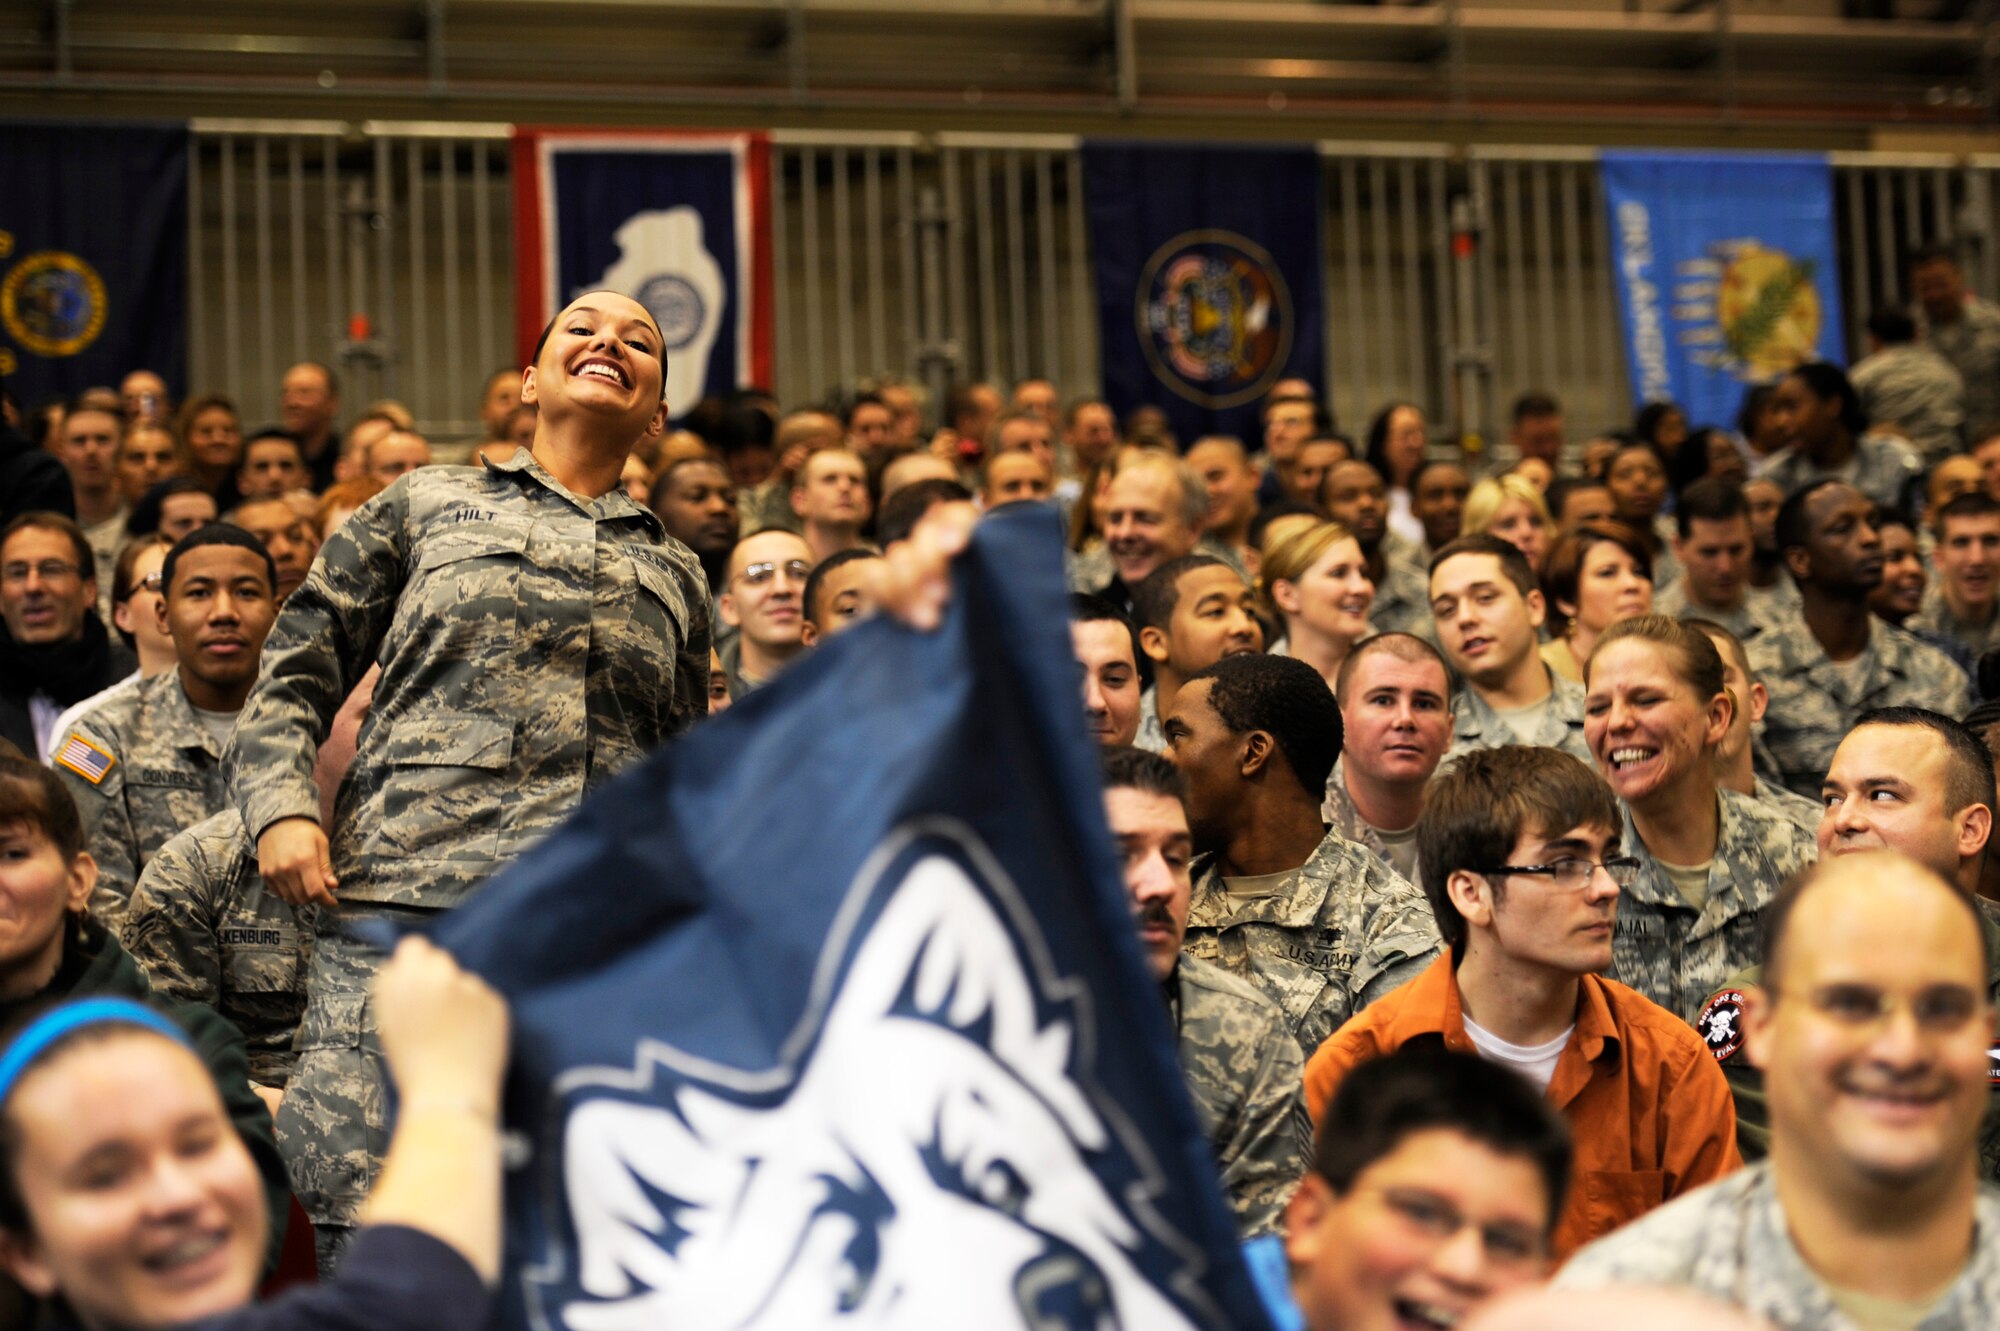 Airmen cheer during the 2012 Armed Forces Classic on Ramstein Air Base, Germany, Nov. 10, 2012. The match-up between Michigan State University and University of Connecticut is part of ESPN's Veteran's week initiative to honor the men and women who have served and are still serving in the U.S. military. (U.S. Air Force photo/Senior Airman Aaron-Forrest Wainwright)